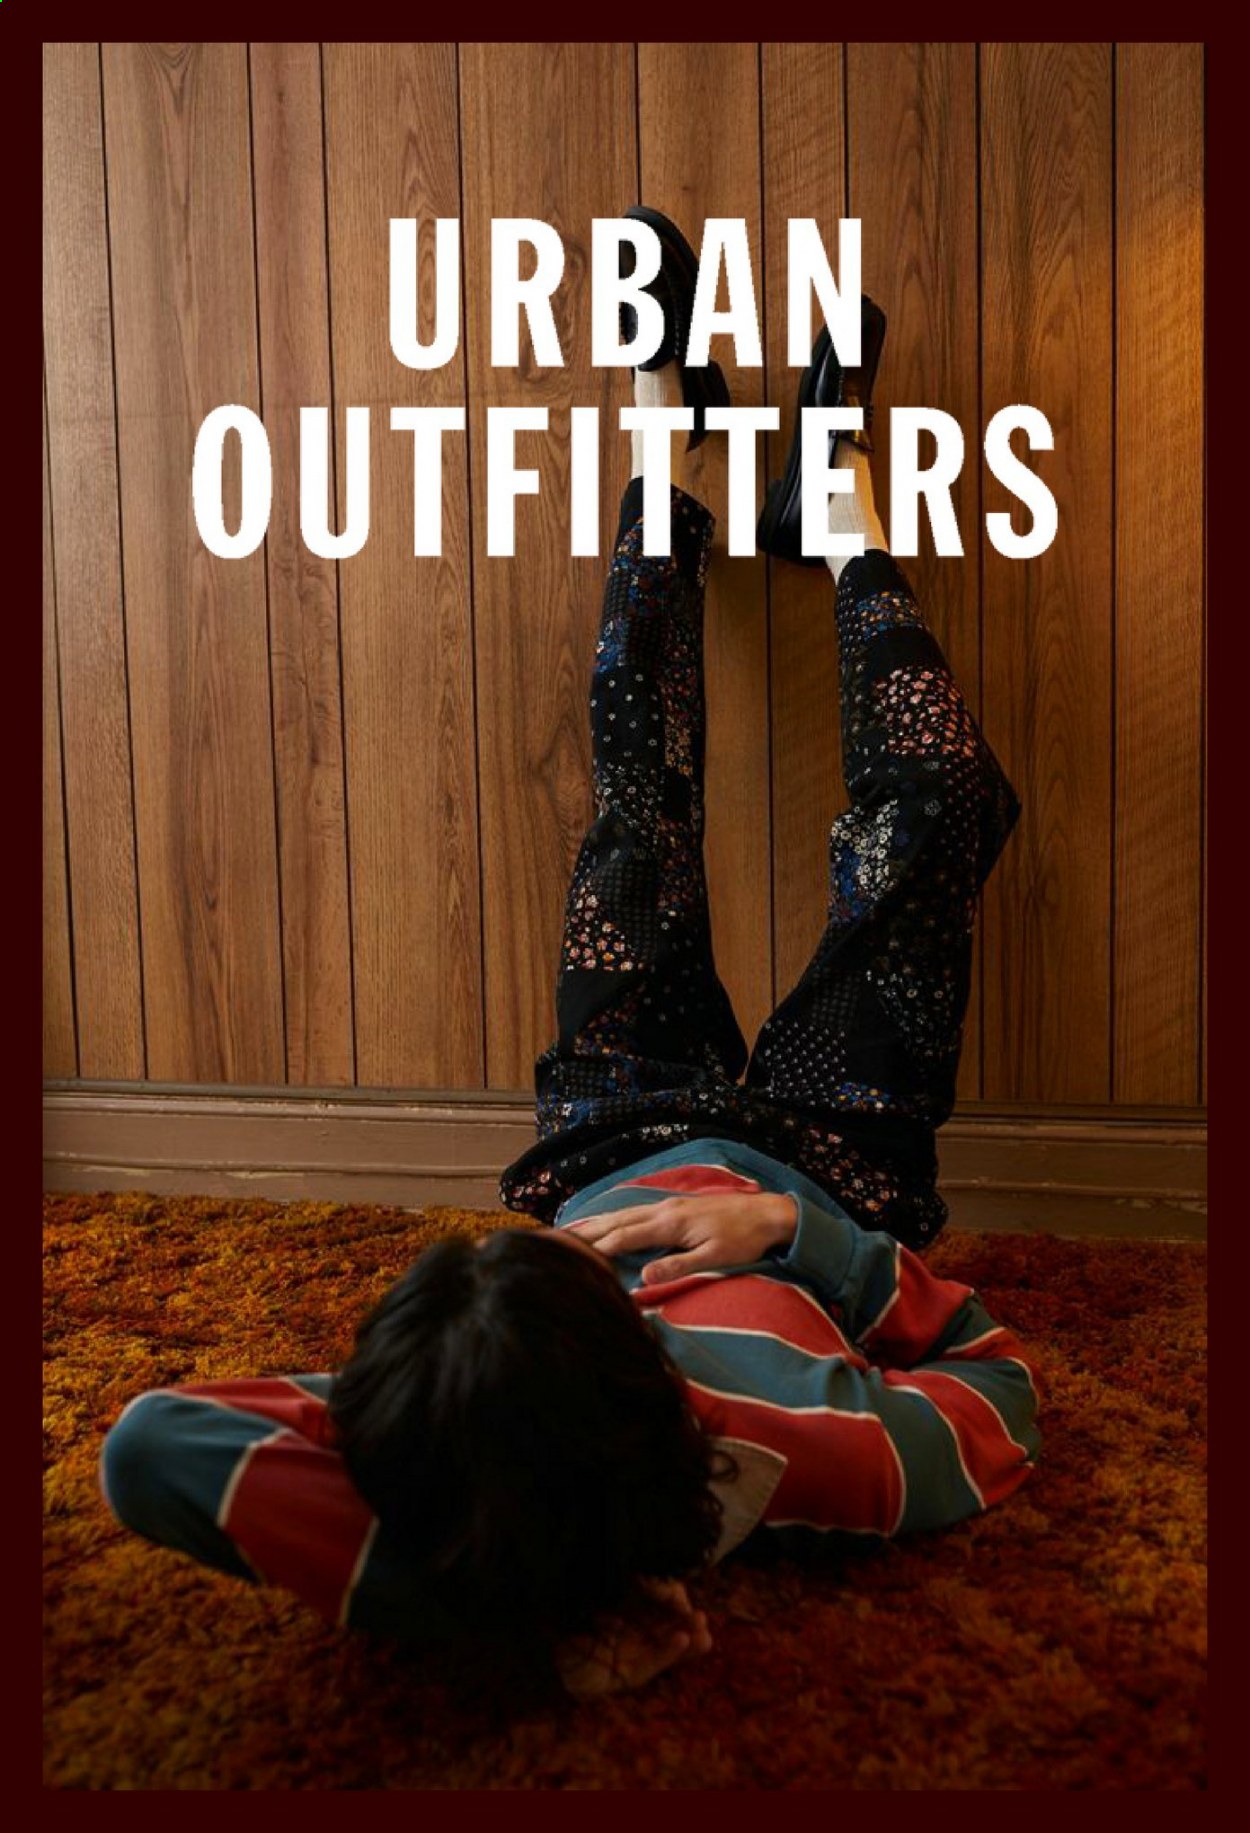 thumbnail - Urban Outfitters flyer.